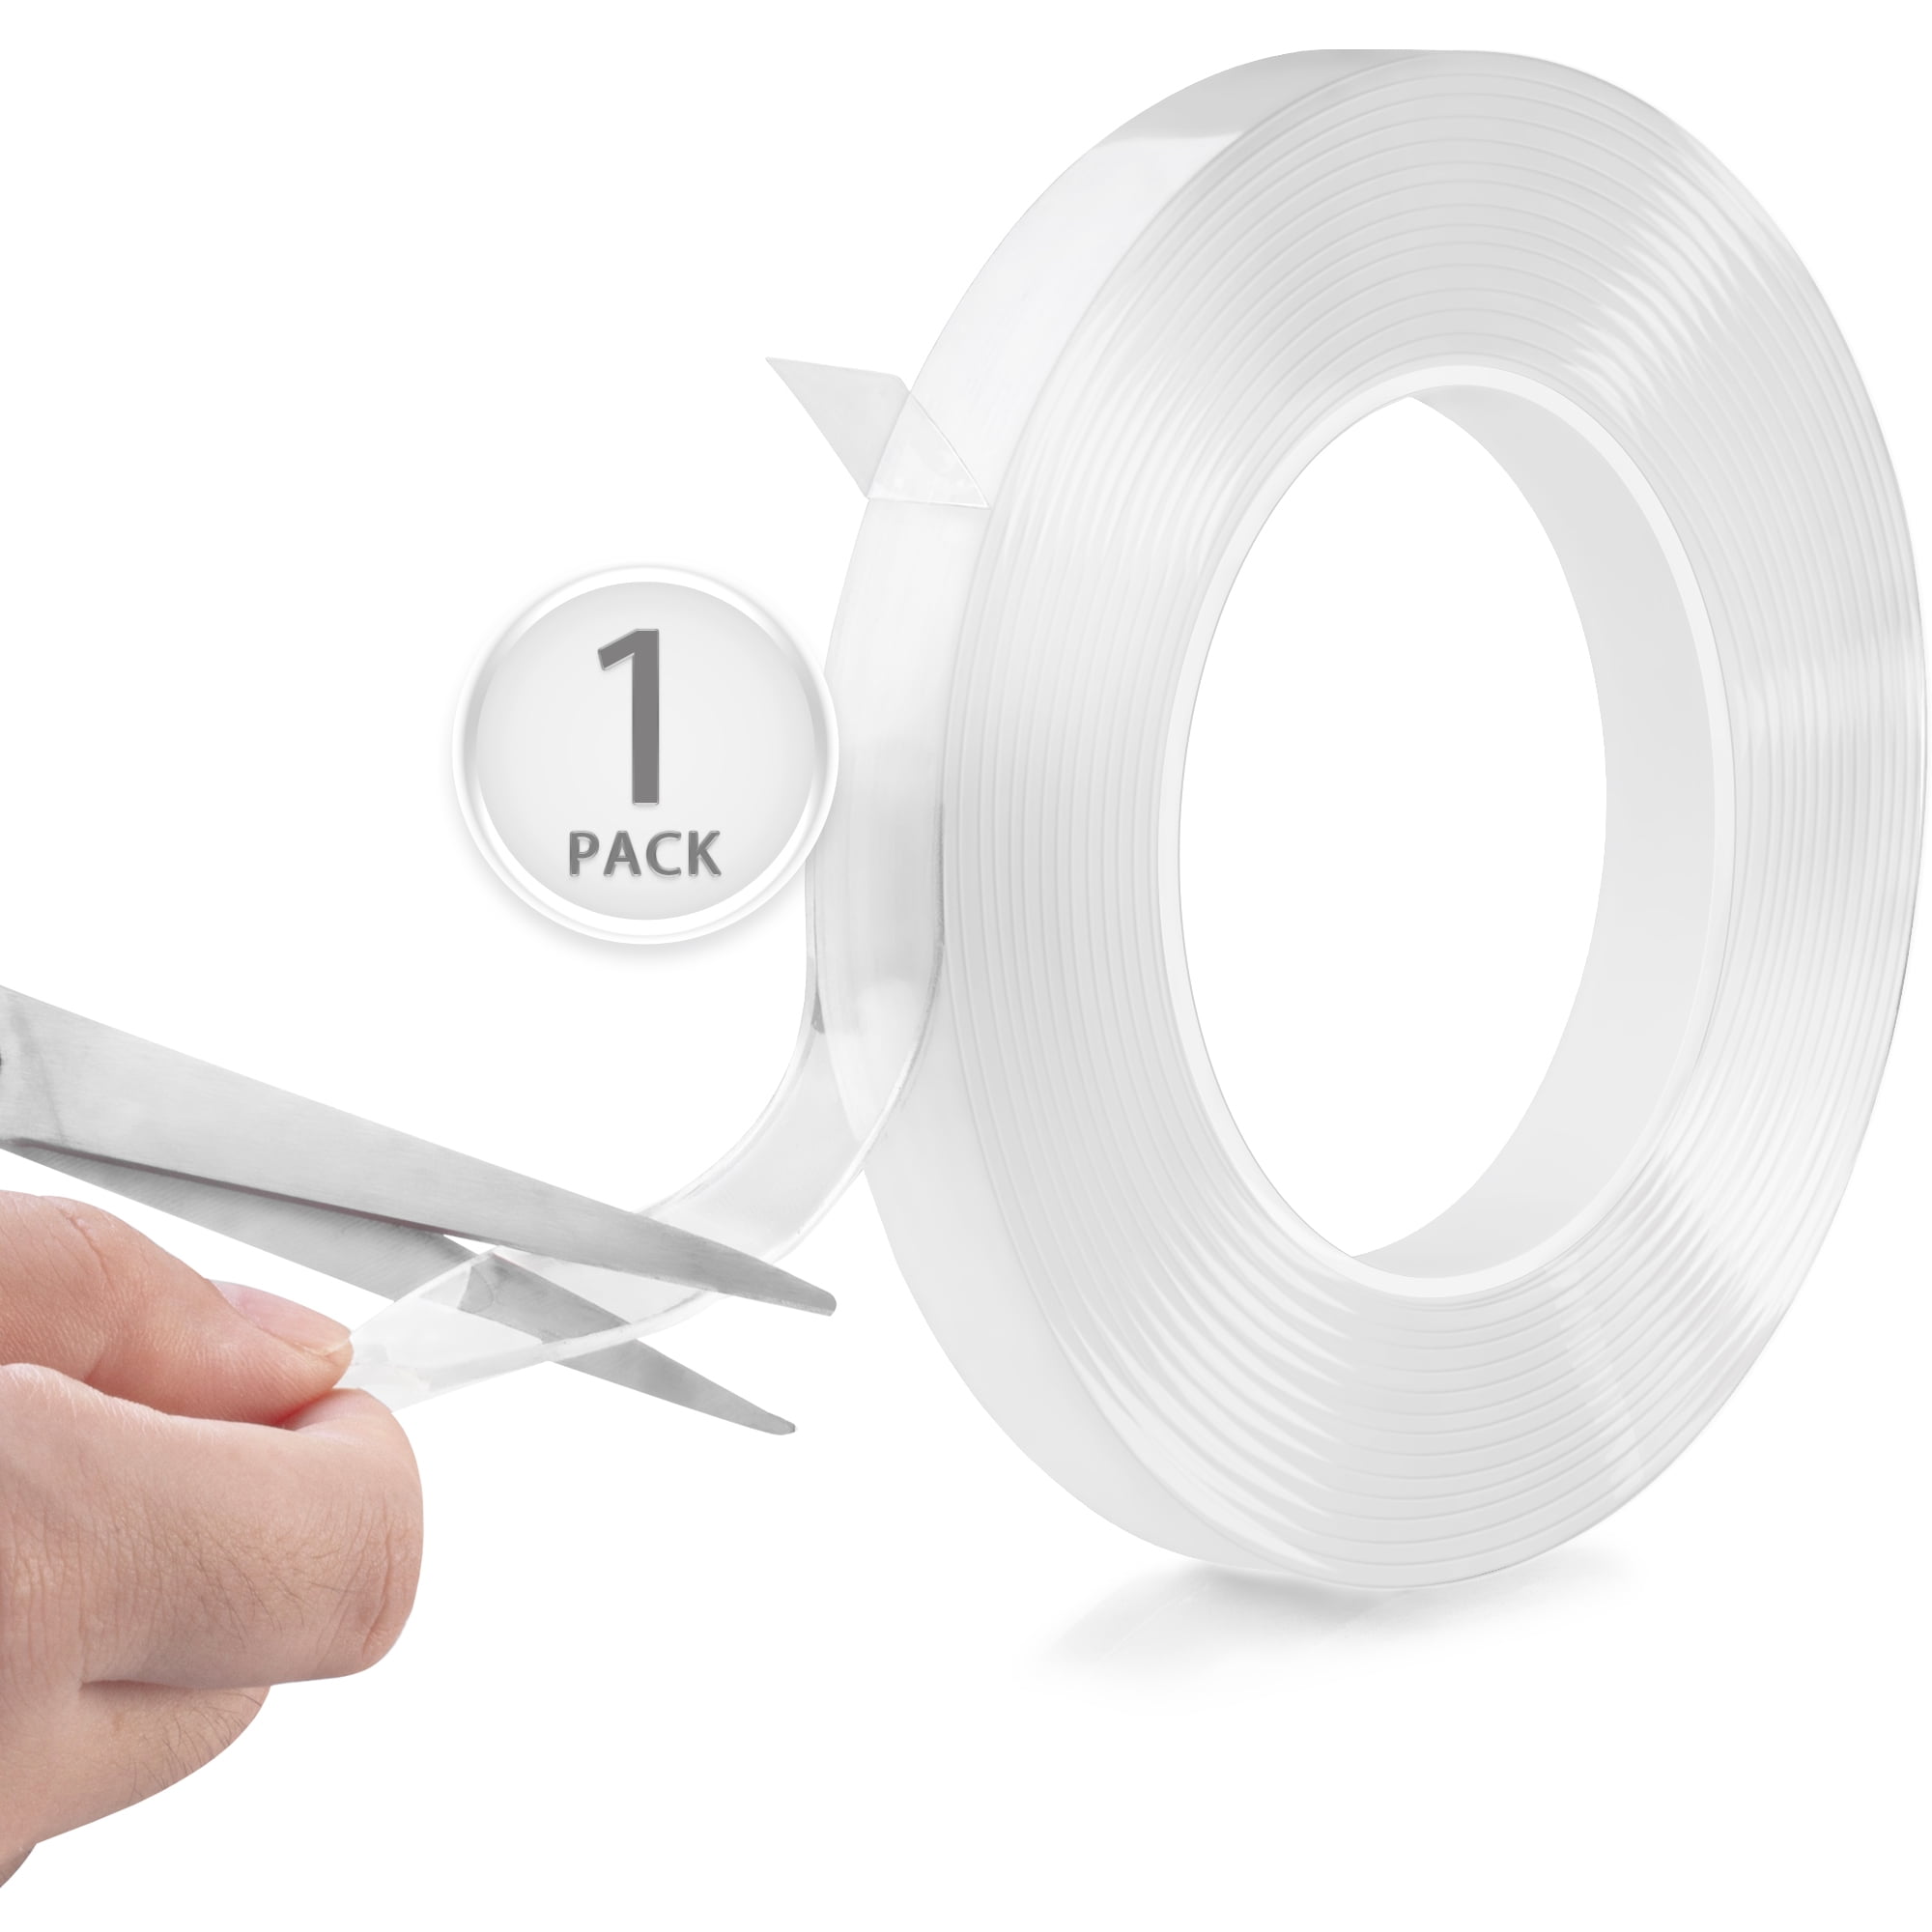 Double Sided Clear Mounting Tape 1.2 inch Wide, 9.8' Long Acrylic Gel Tape for Temps 0-100, Heavy Duty Multipurpose by KapStrom, Size: 3M